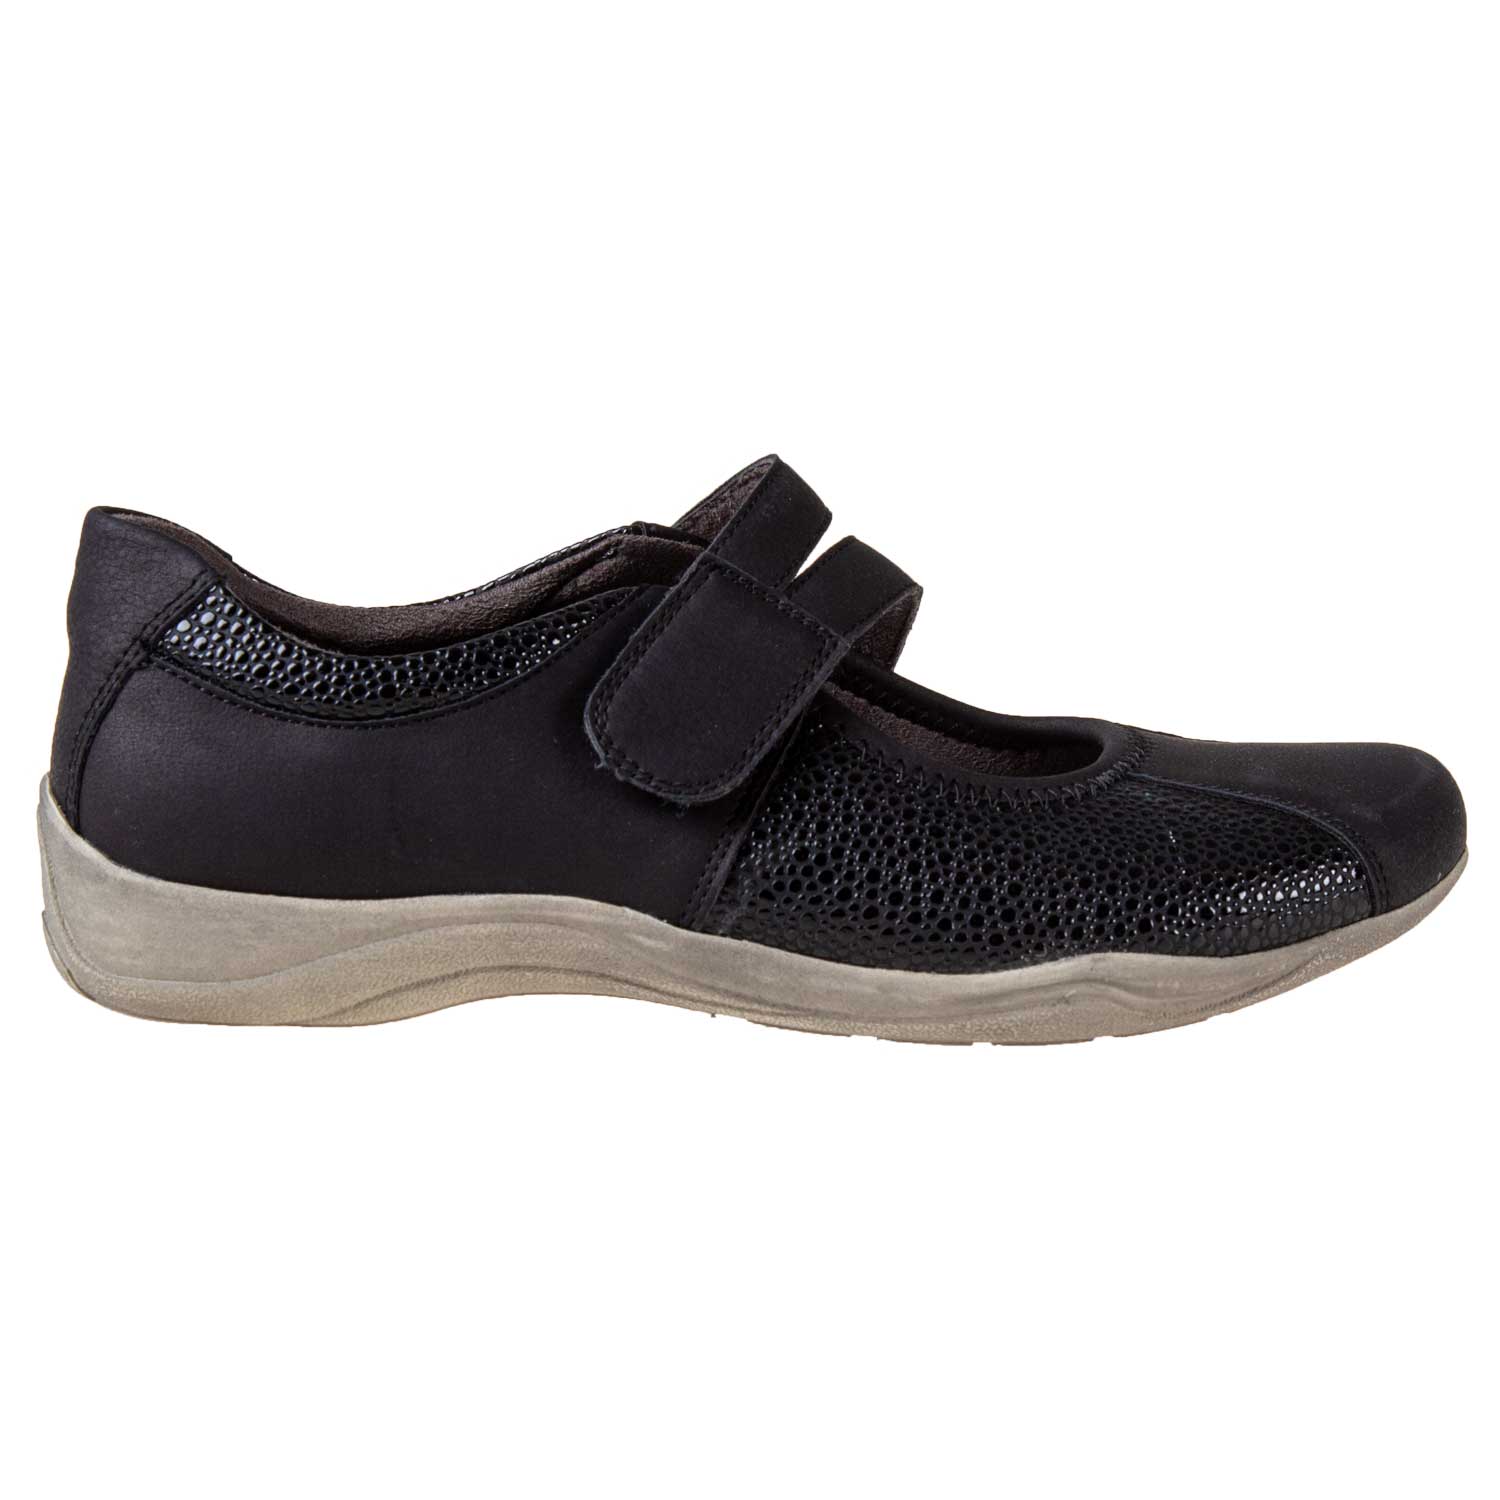 Women's round toe slip-on sports shoes with velcro closure, size 7